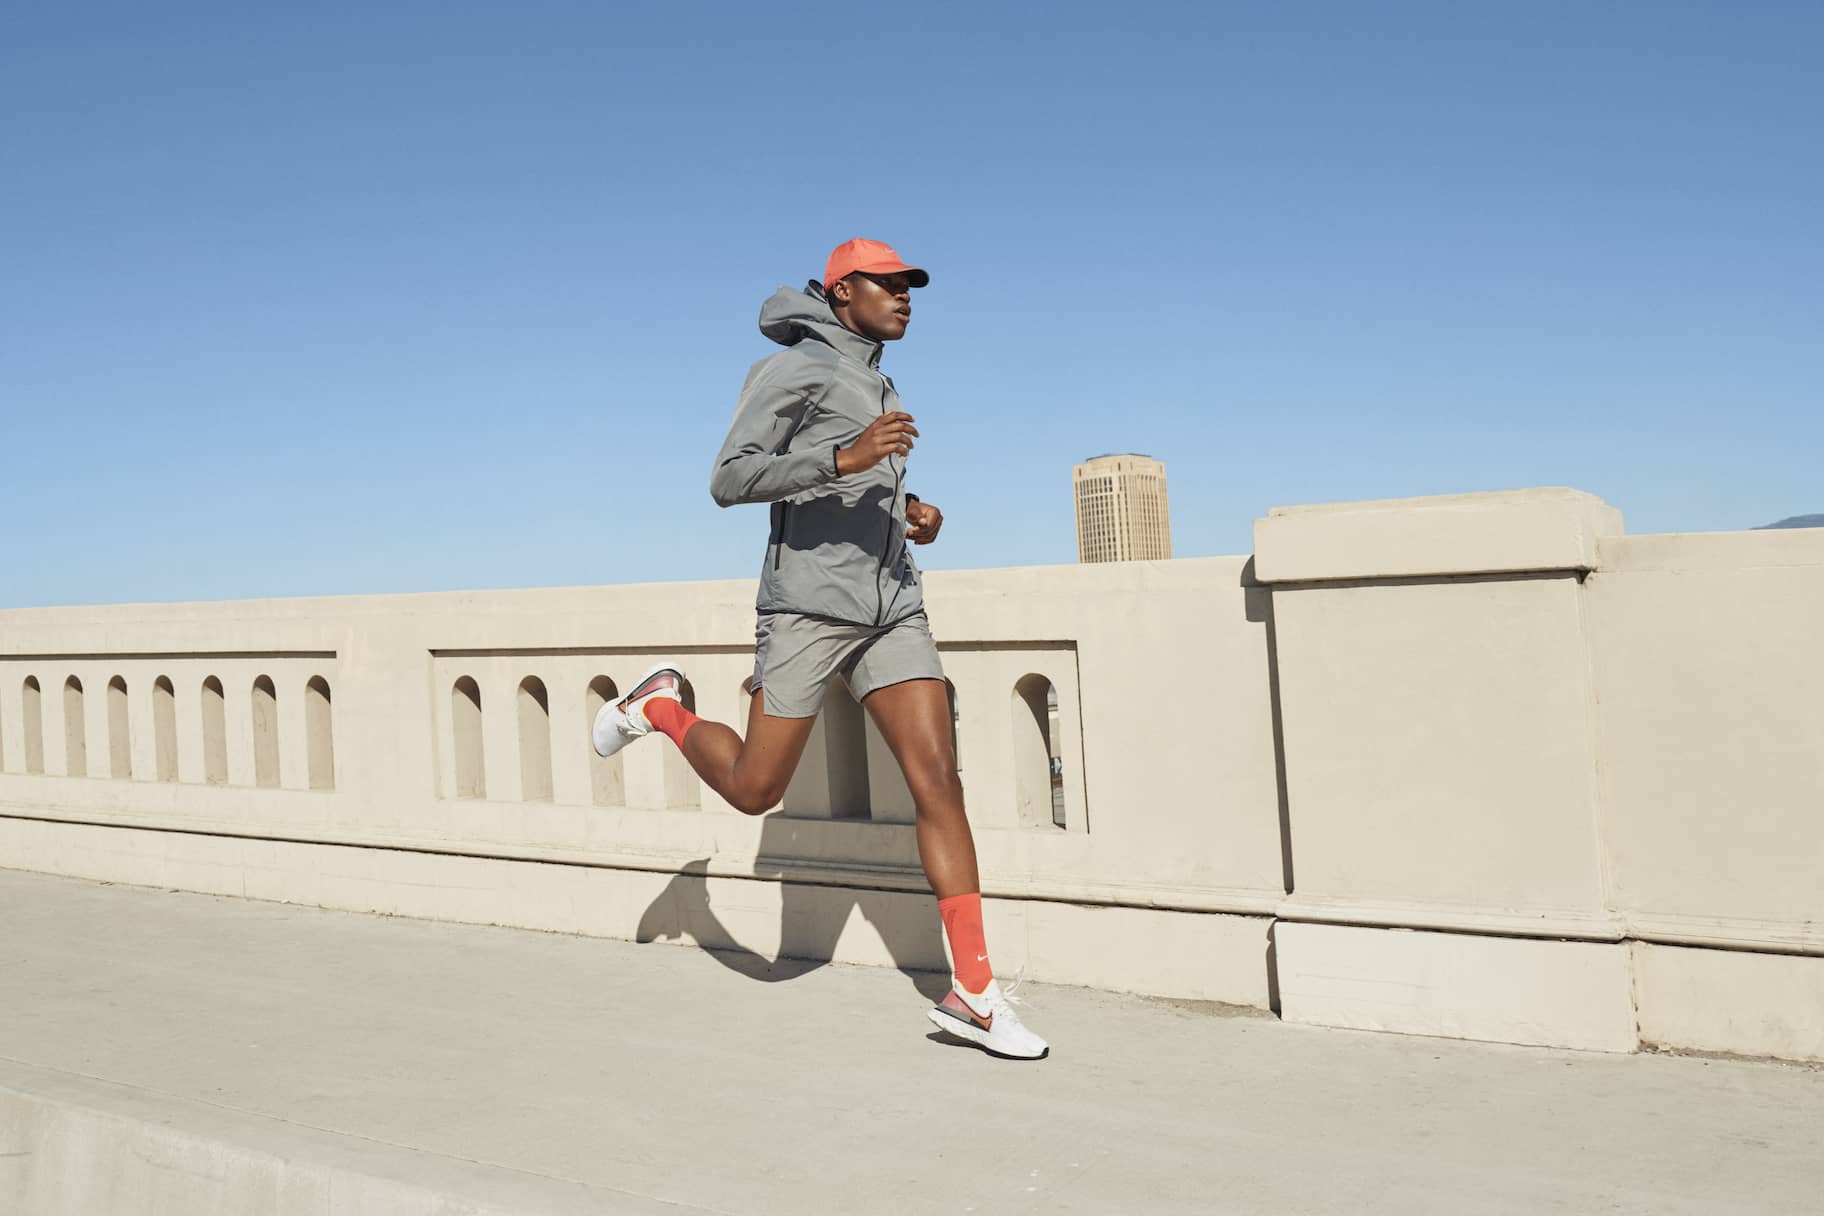 What Nike Shoes Are Best for Long-Distance Running?